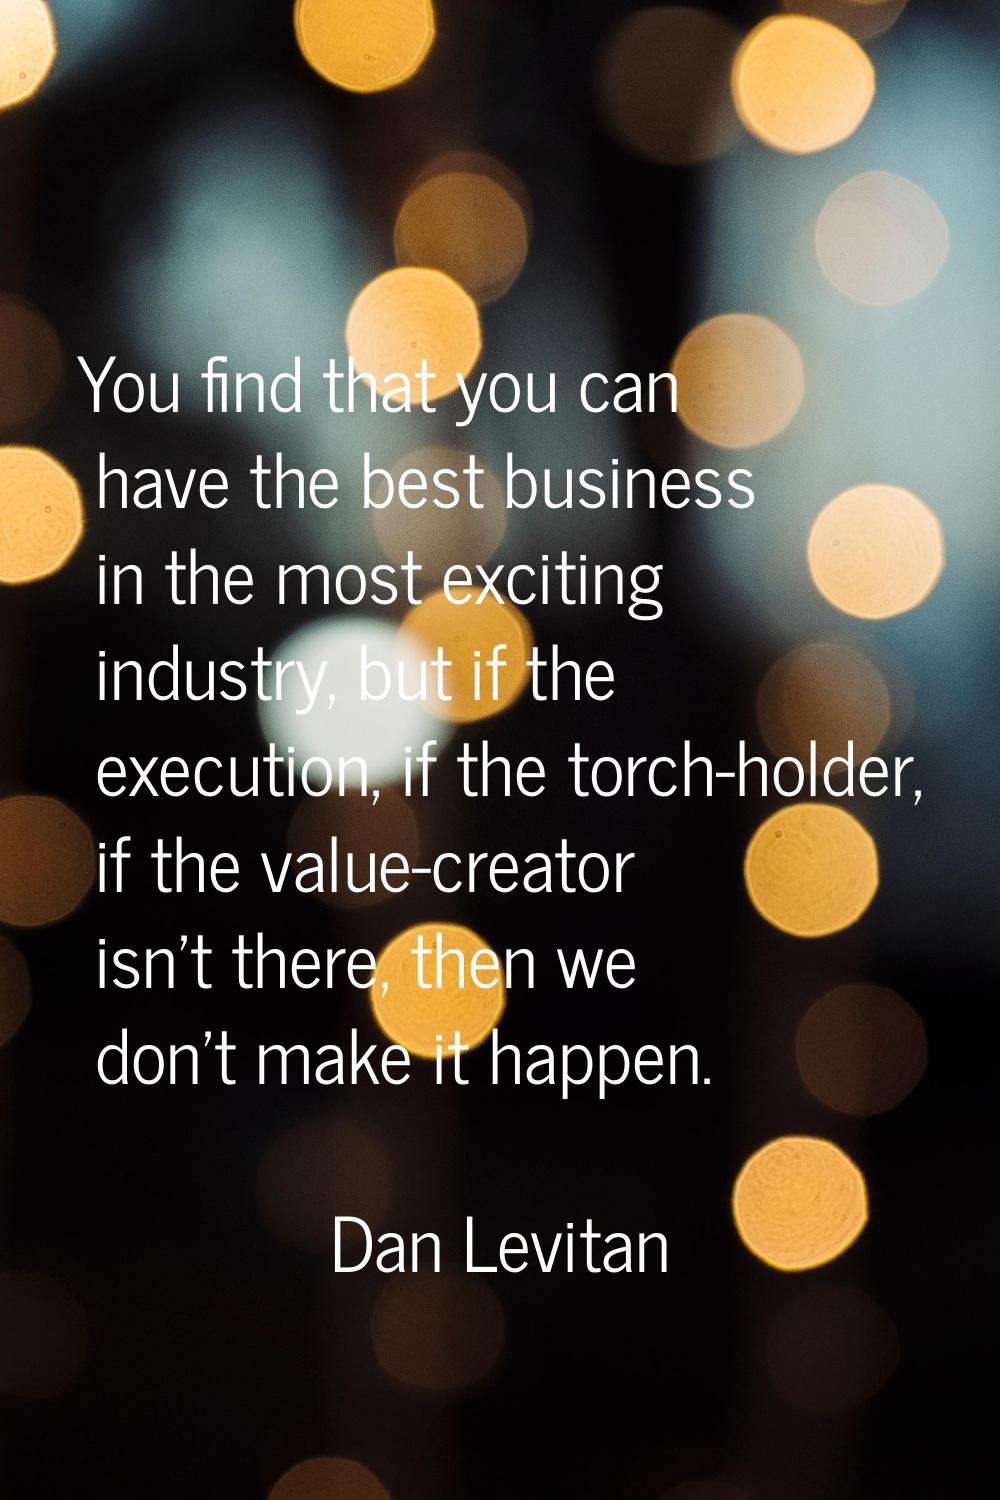 You find that you can have the best business in the most exciting industry, but if the execution, i